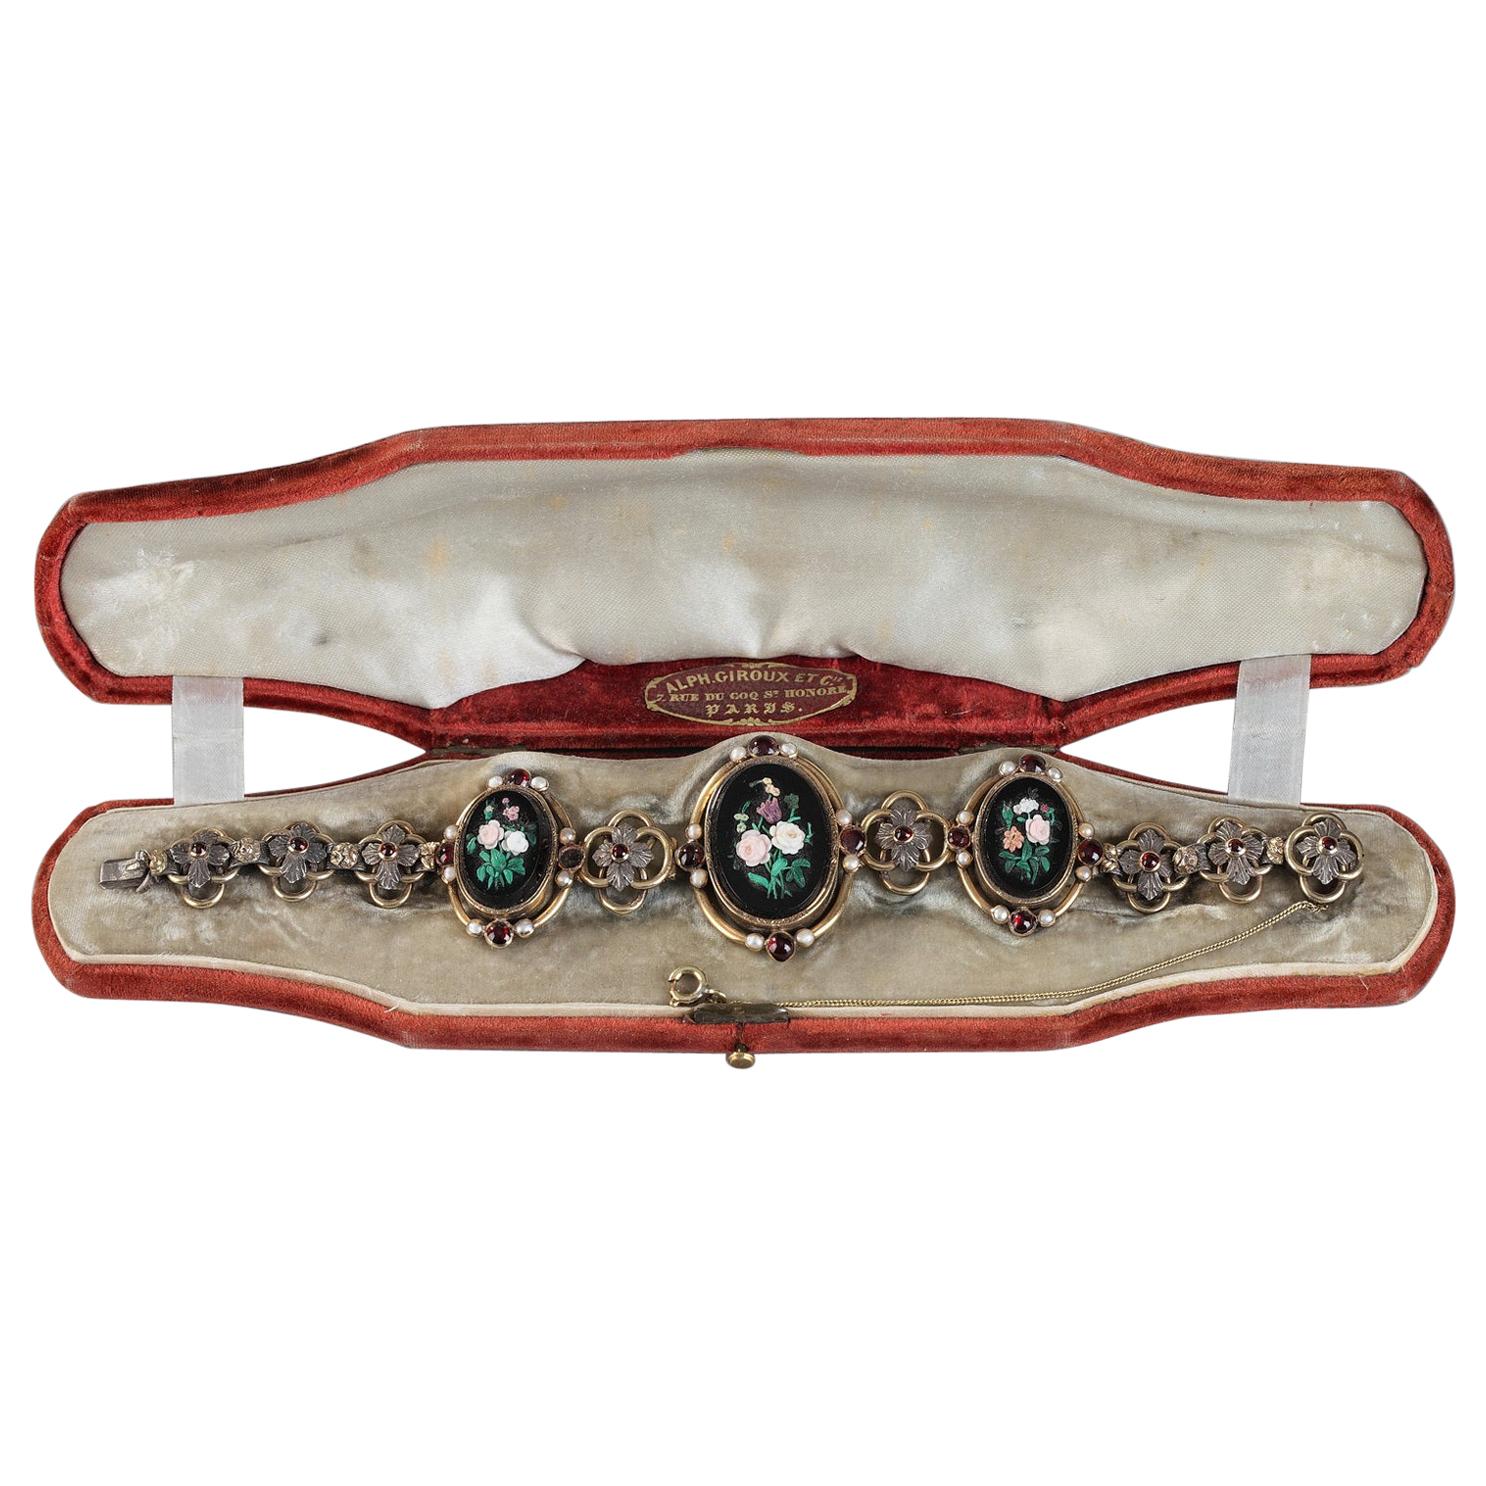 19th Century Silver-Gilt Bracelet with Micromosaic Medallions For Sale